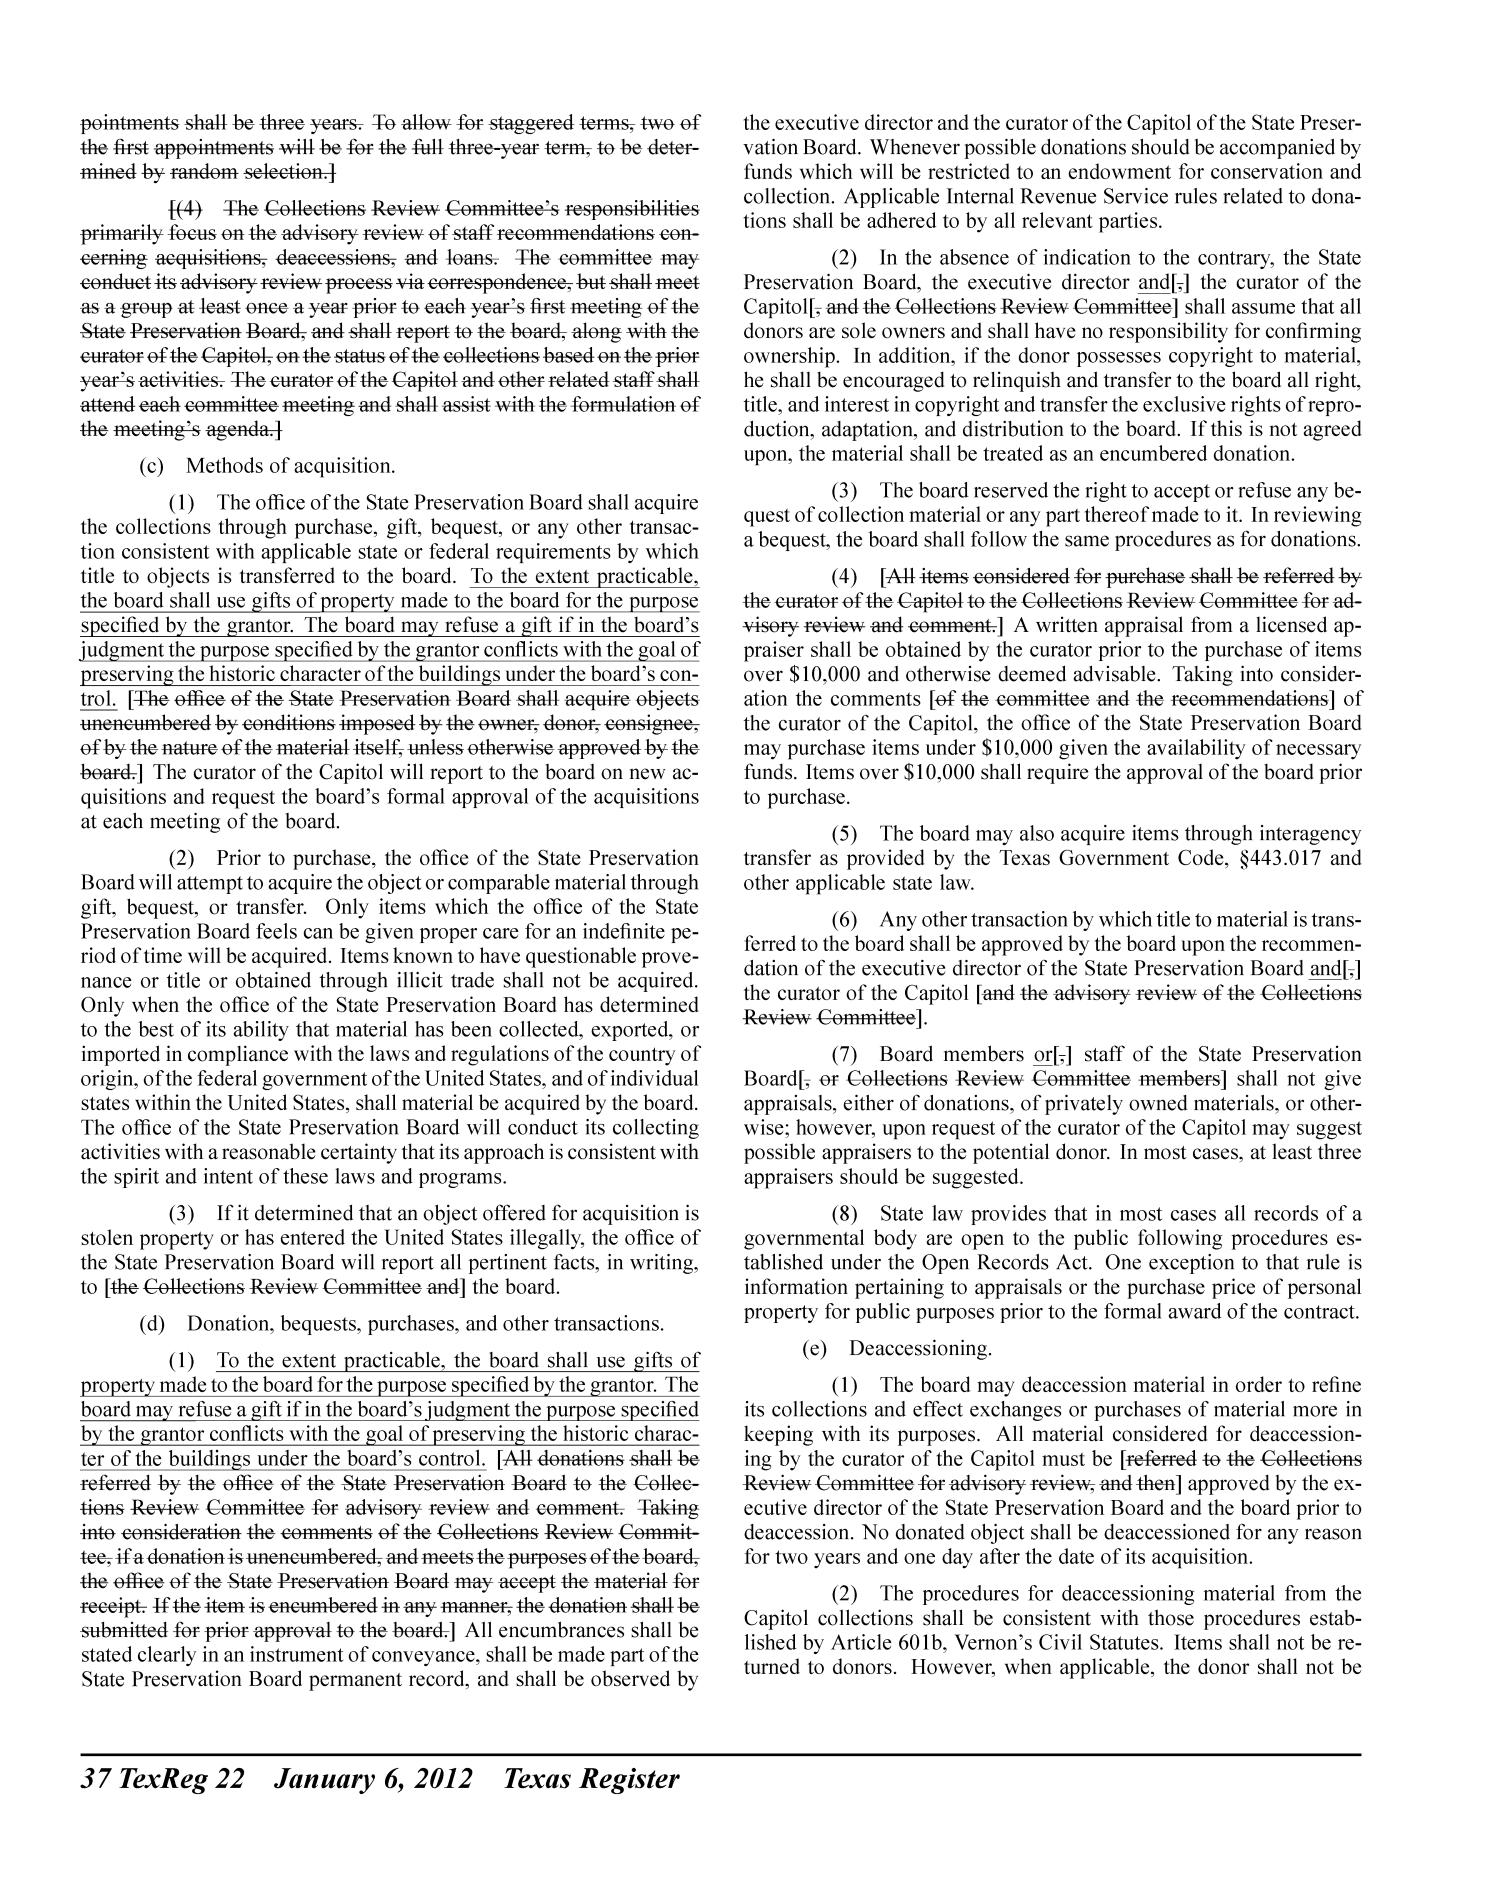 Texas Register, Volume 37, Number 1, Pages 1-84, January 6, 2012
                                                
                                                    22
                                                